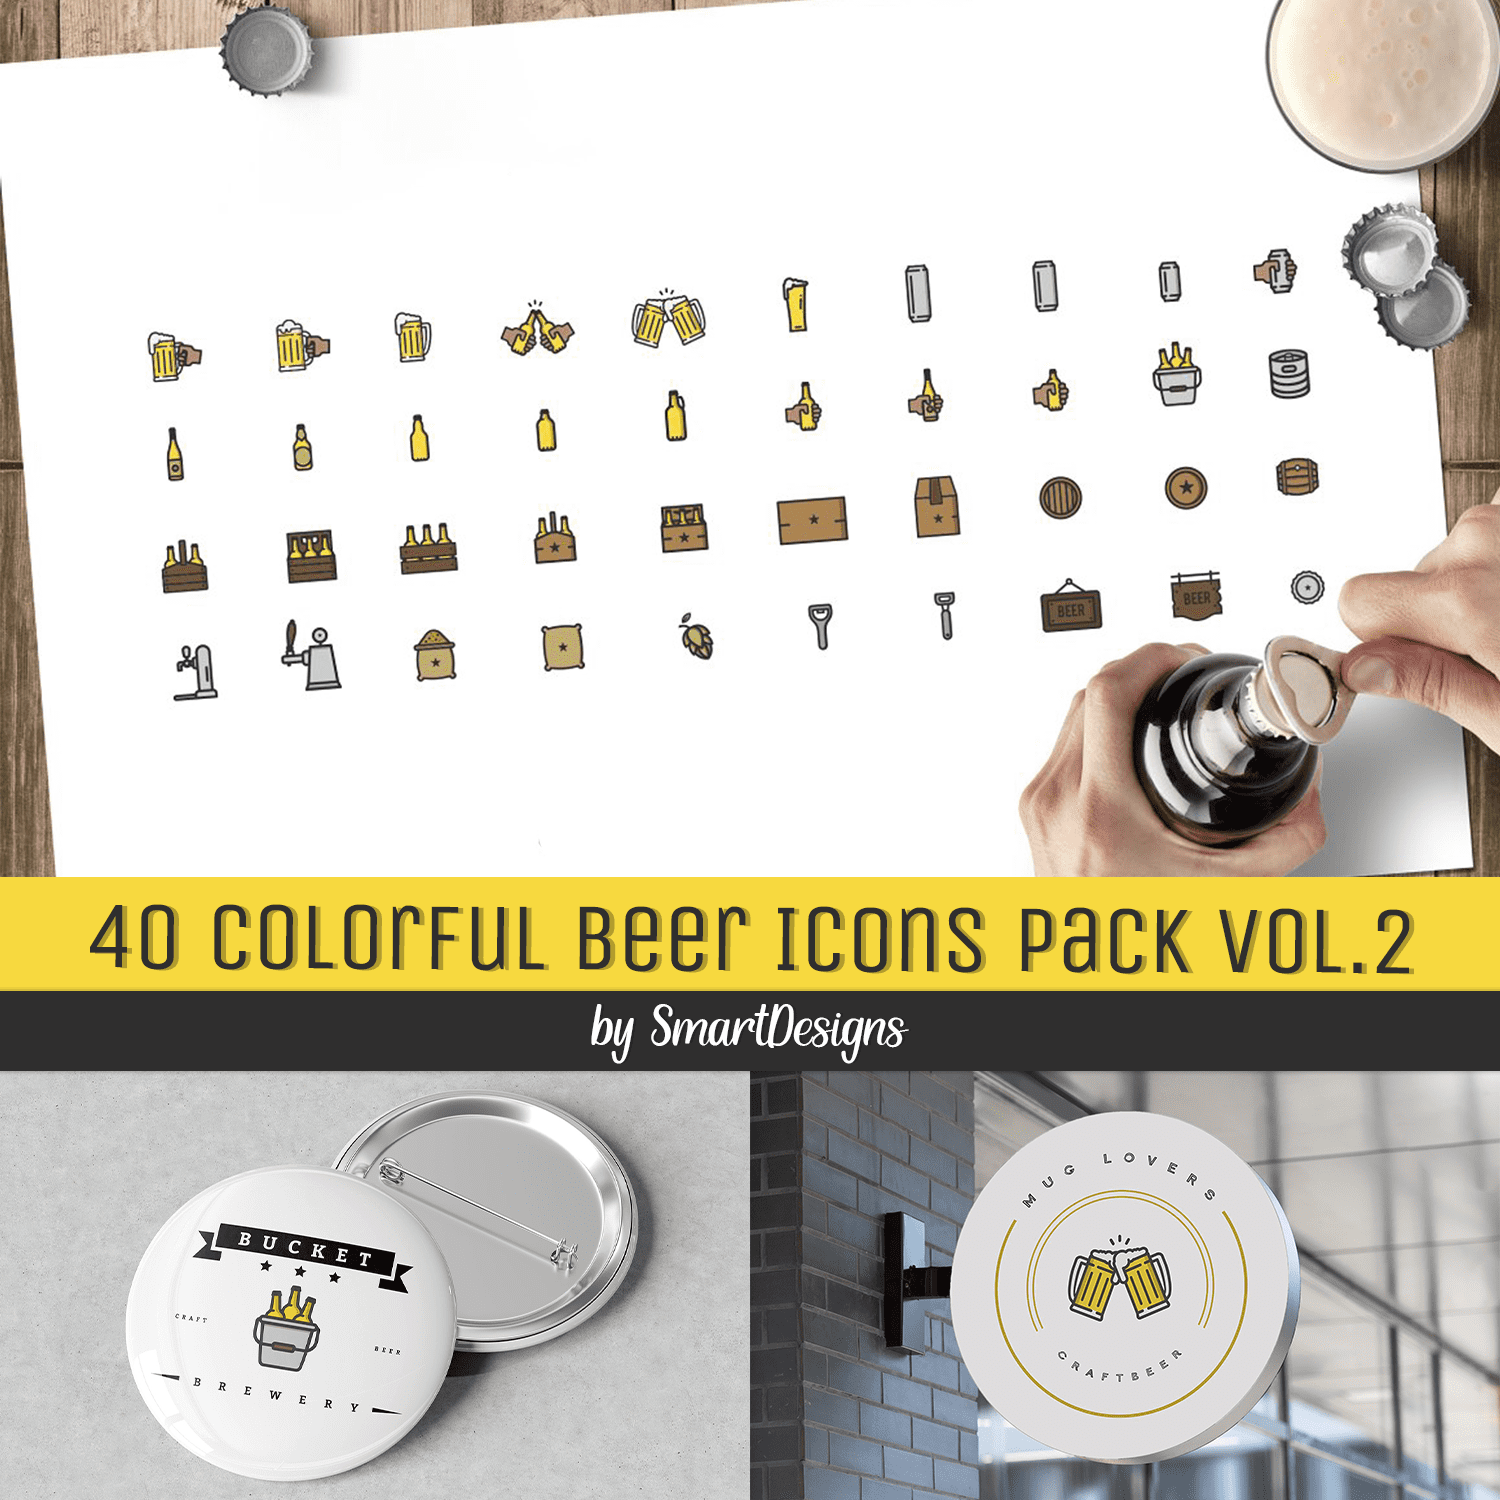 Images with colorful beer icons pack vol.2.